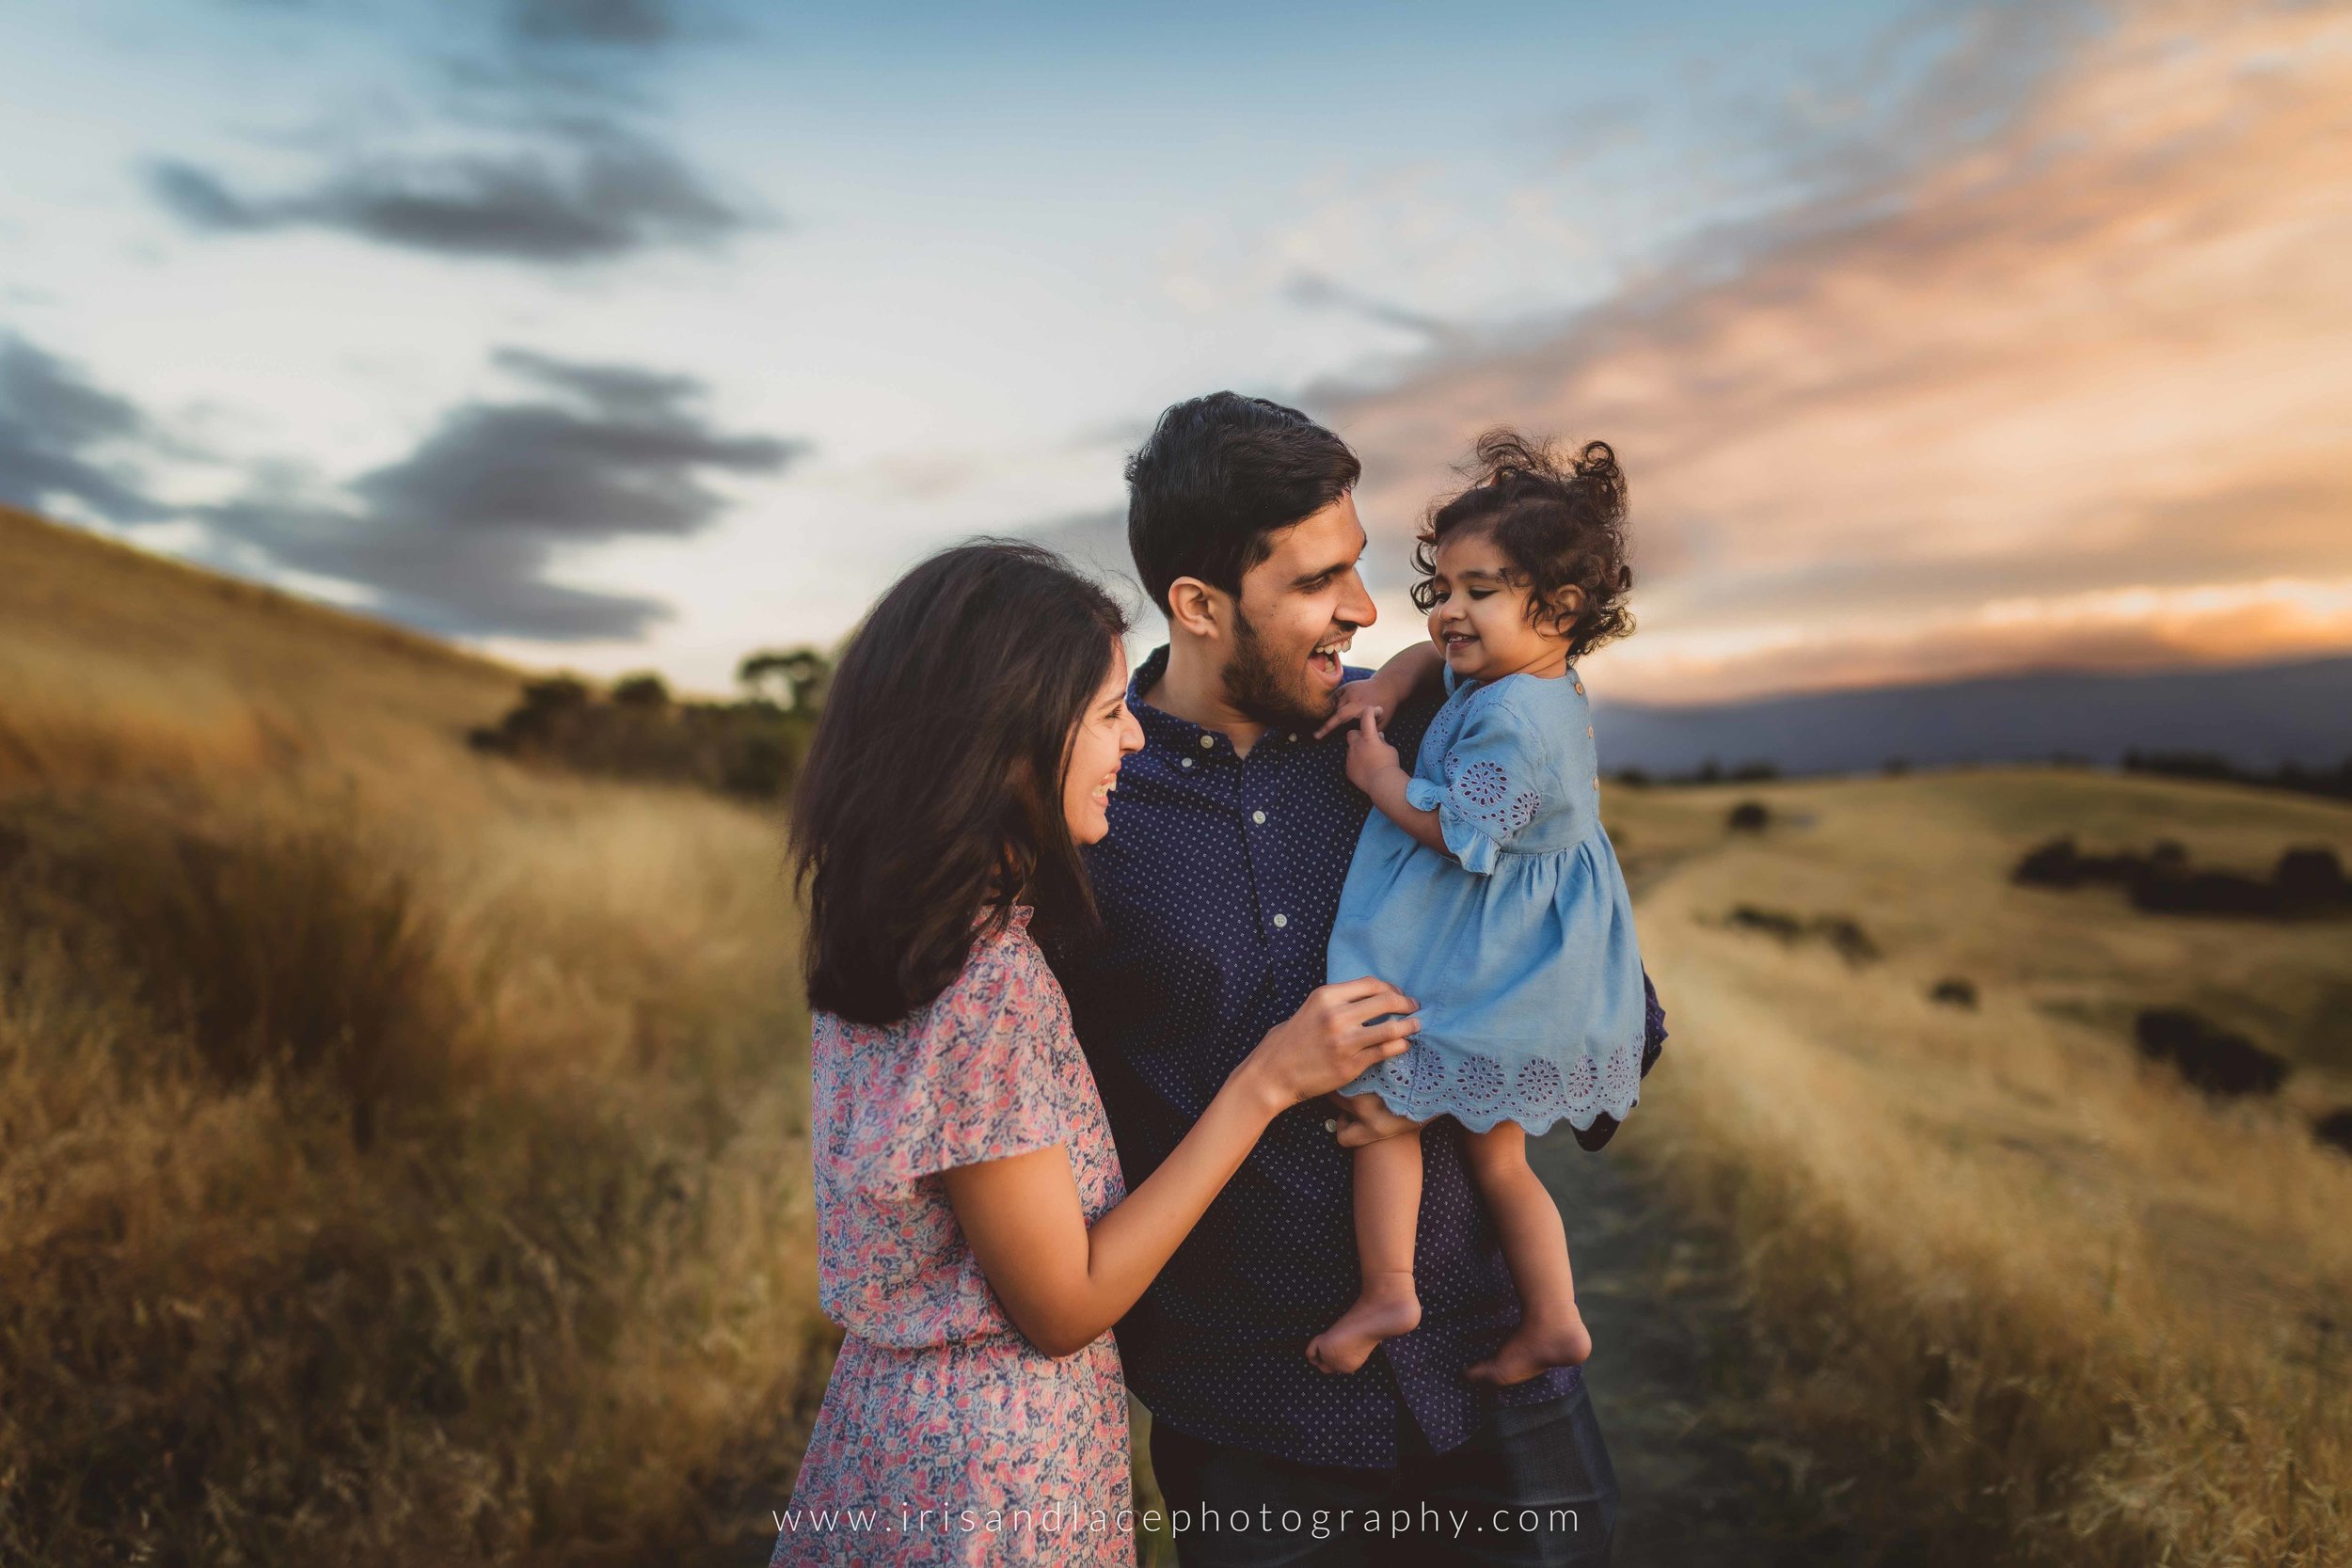 Family Documentary Photography Session  |  Mountain View family photography 